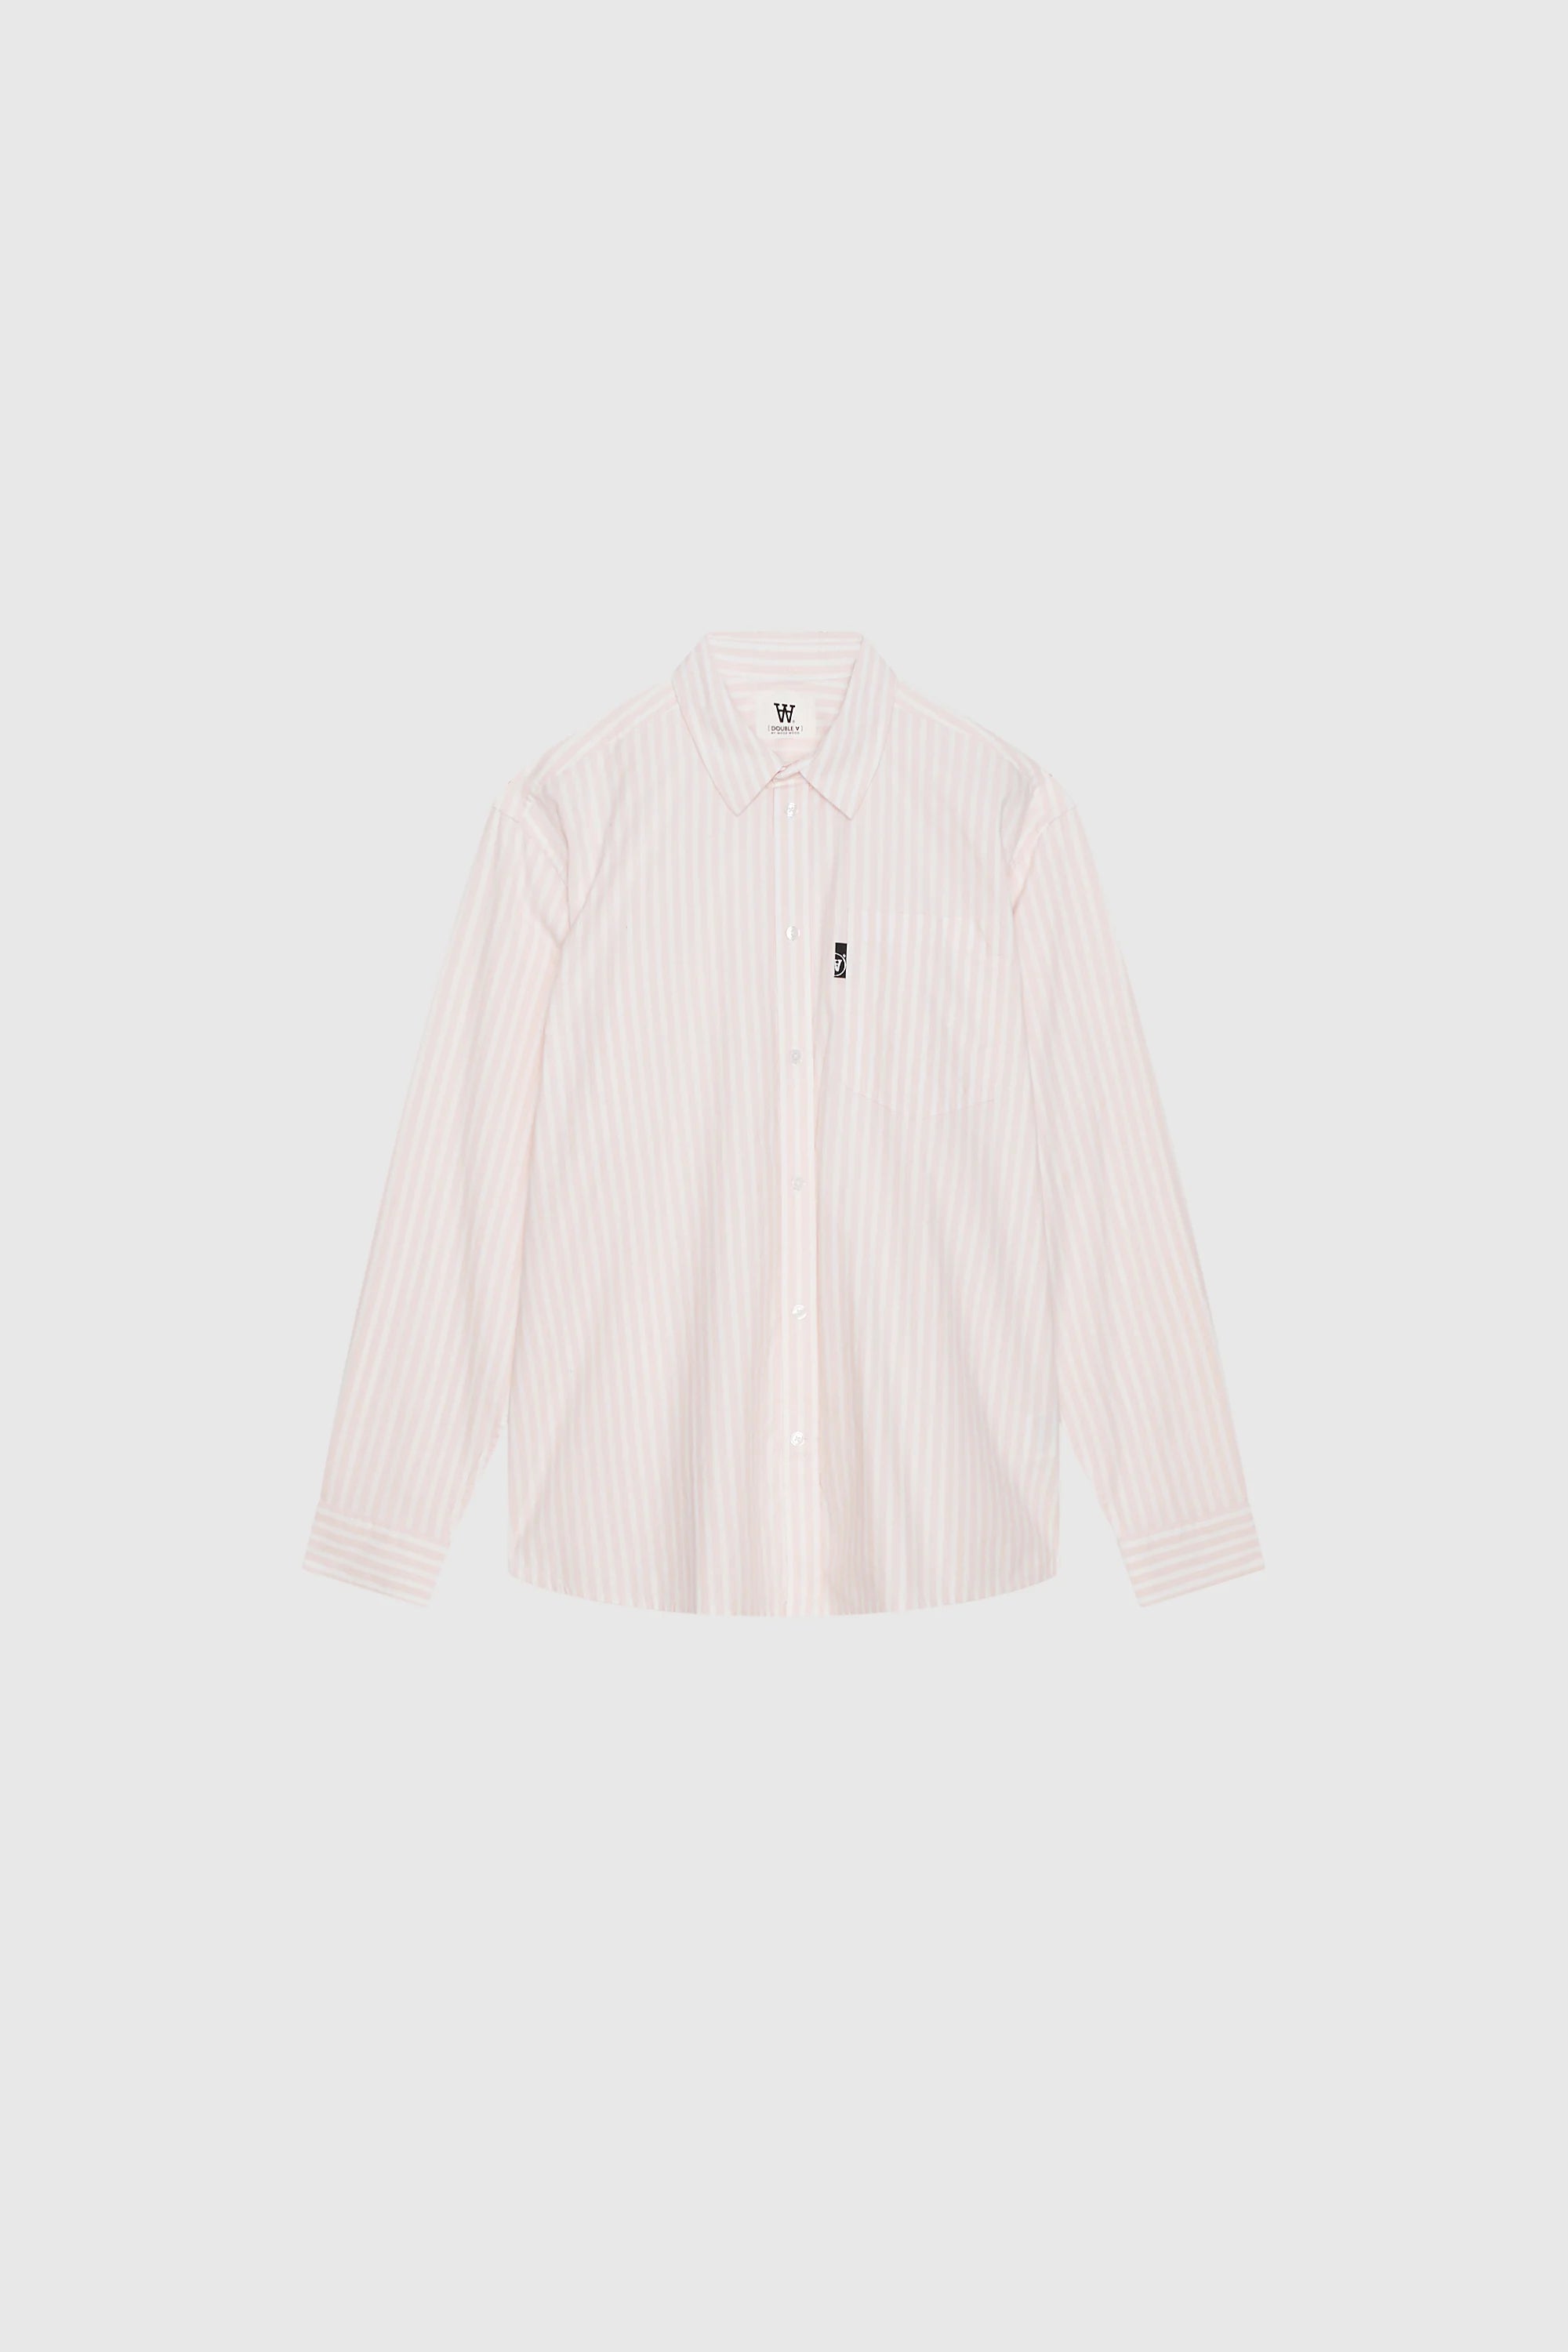 Double A by Wood Wood Day Striped Shirt, pink